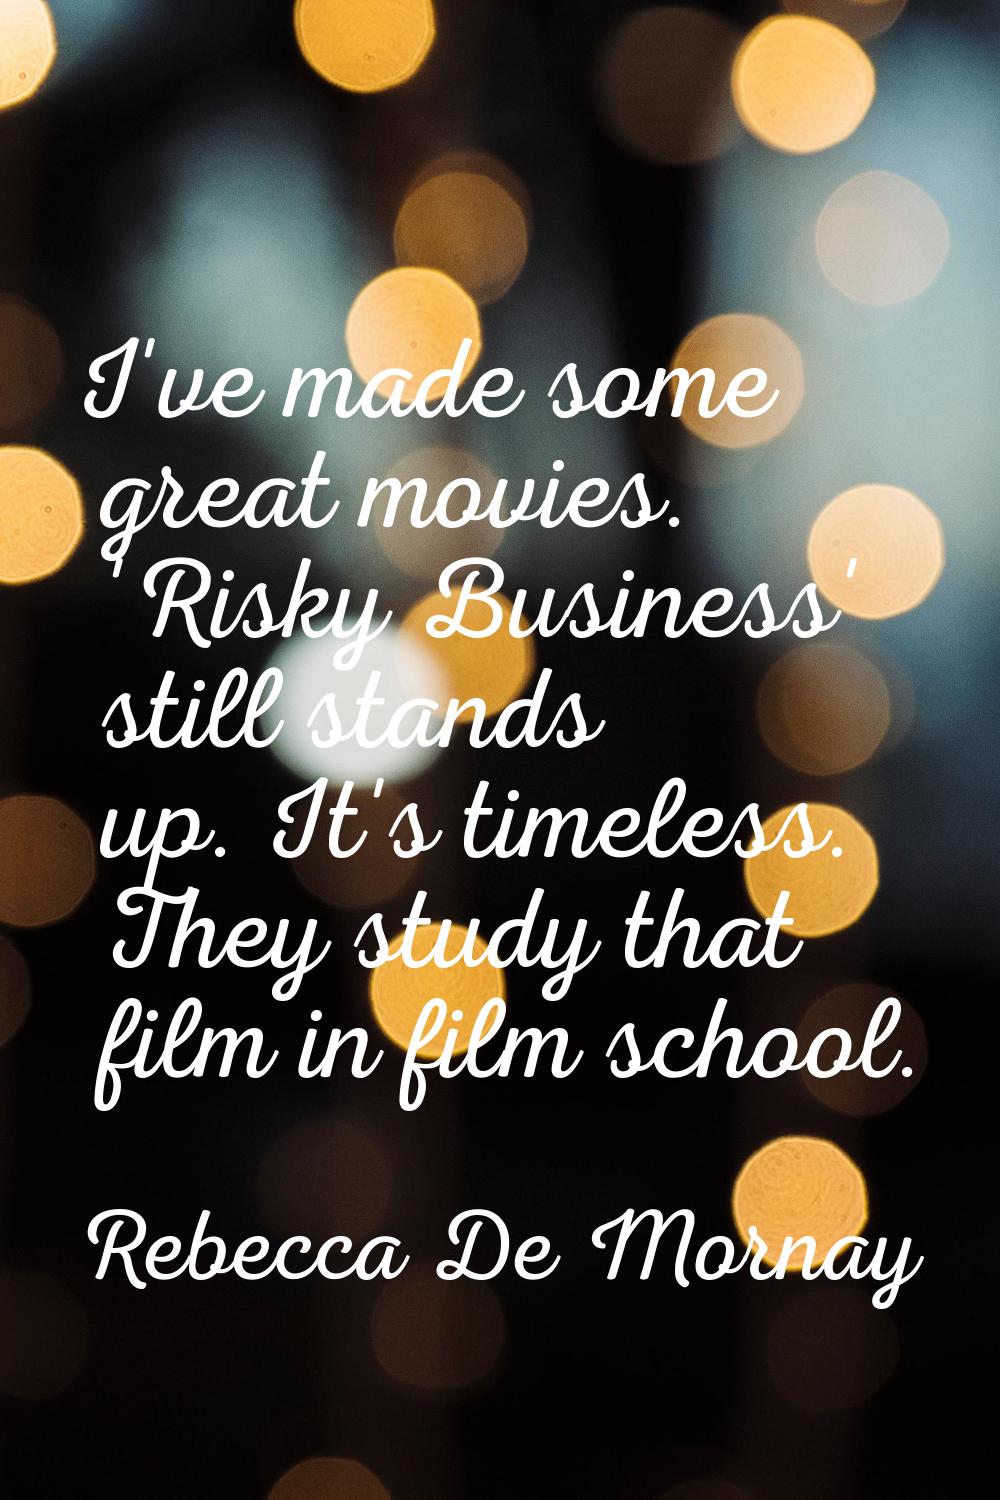 I've made some great movies. 'Risky Business' still stands up. It's timeless. They study that film 